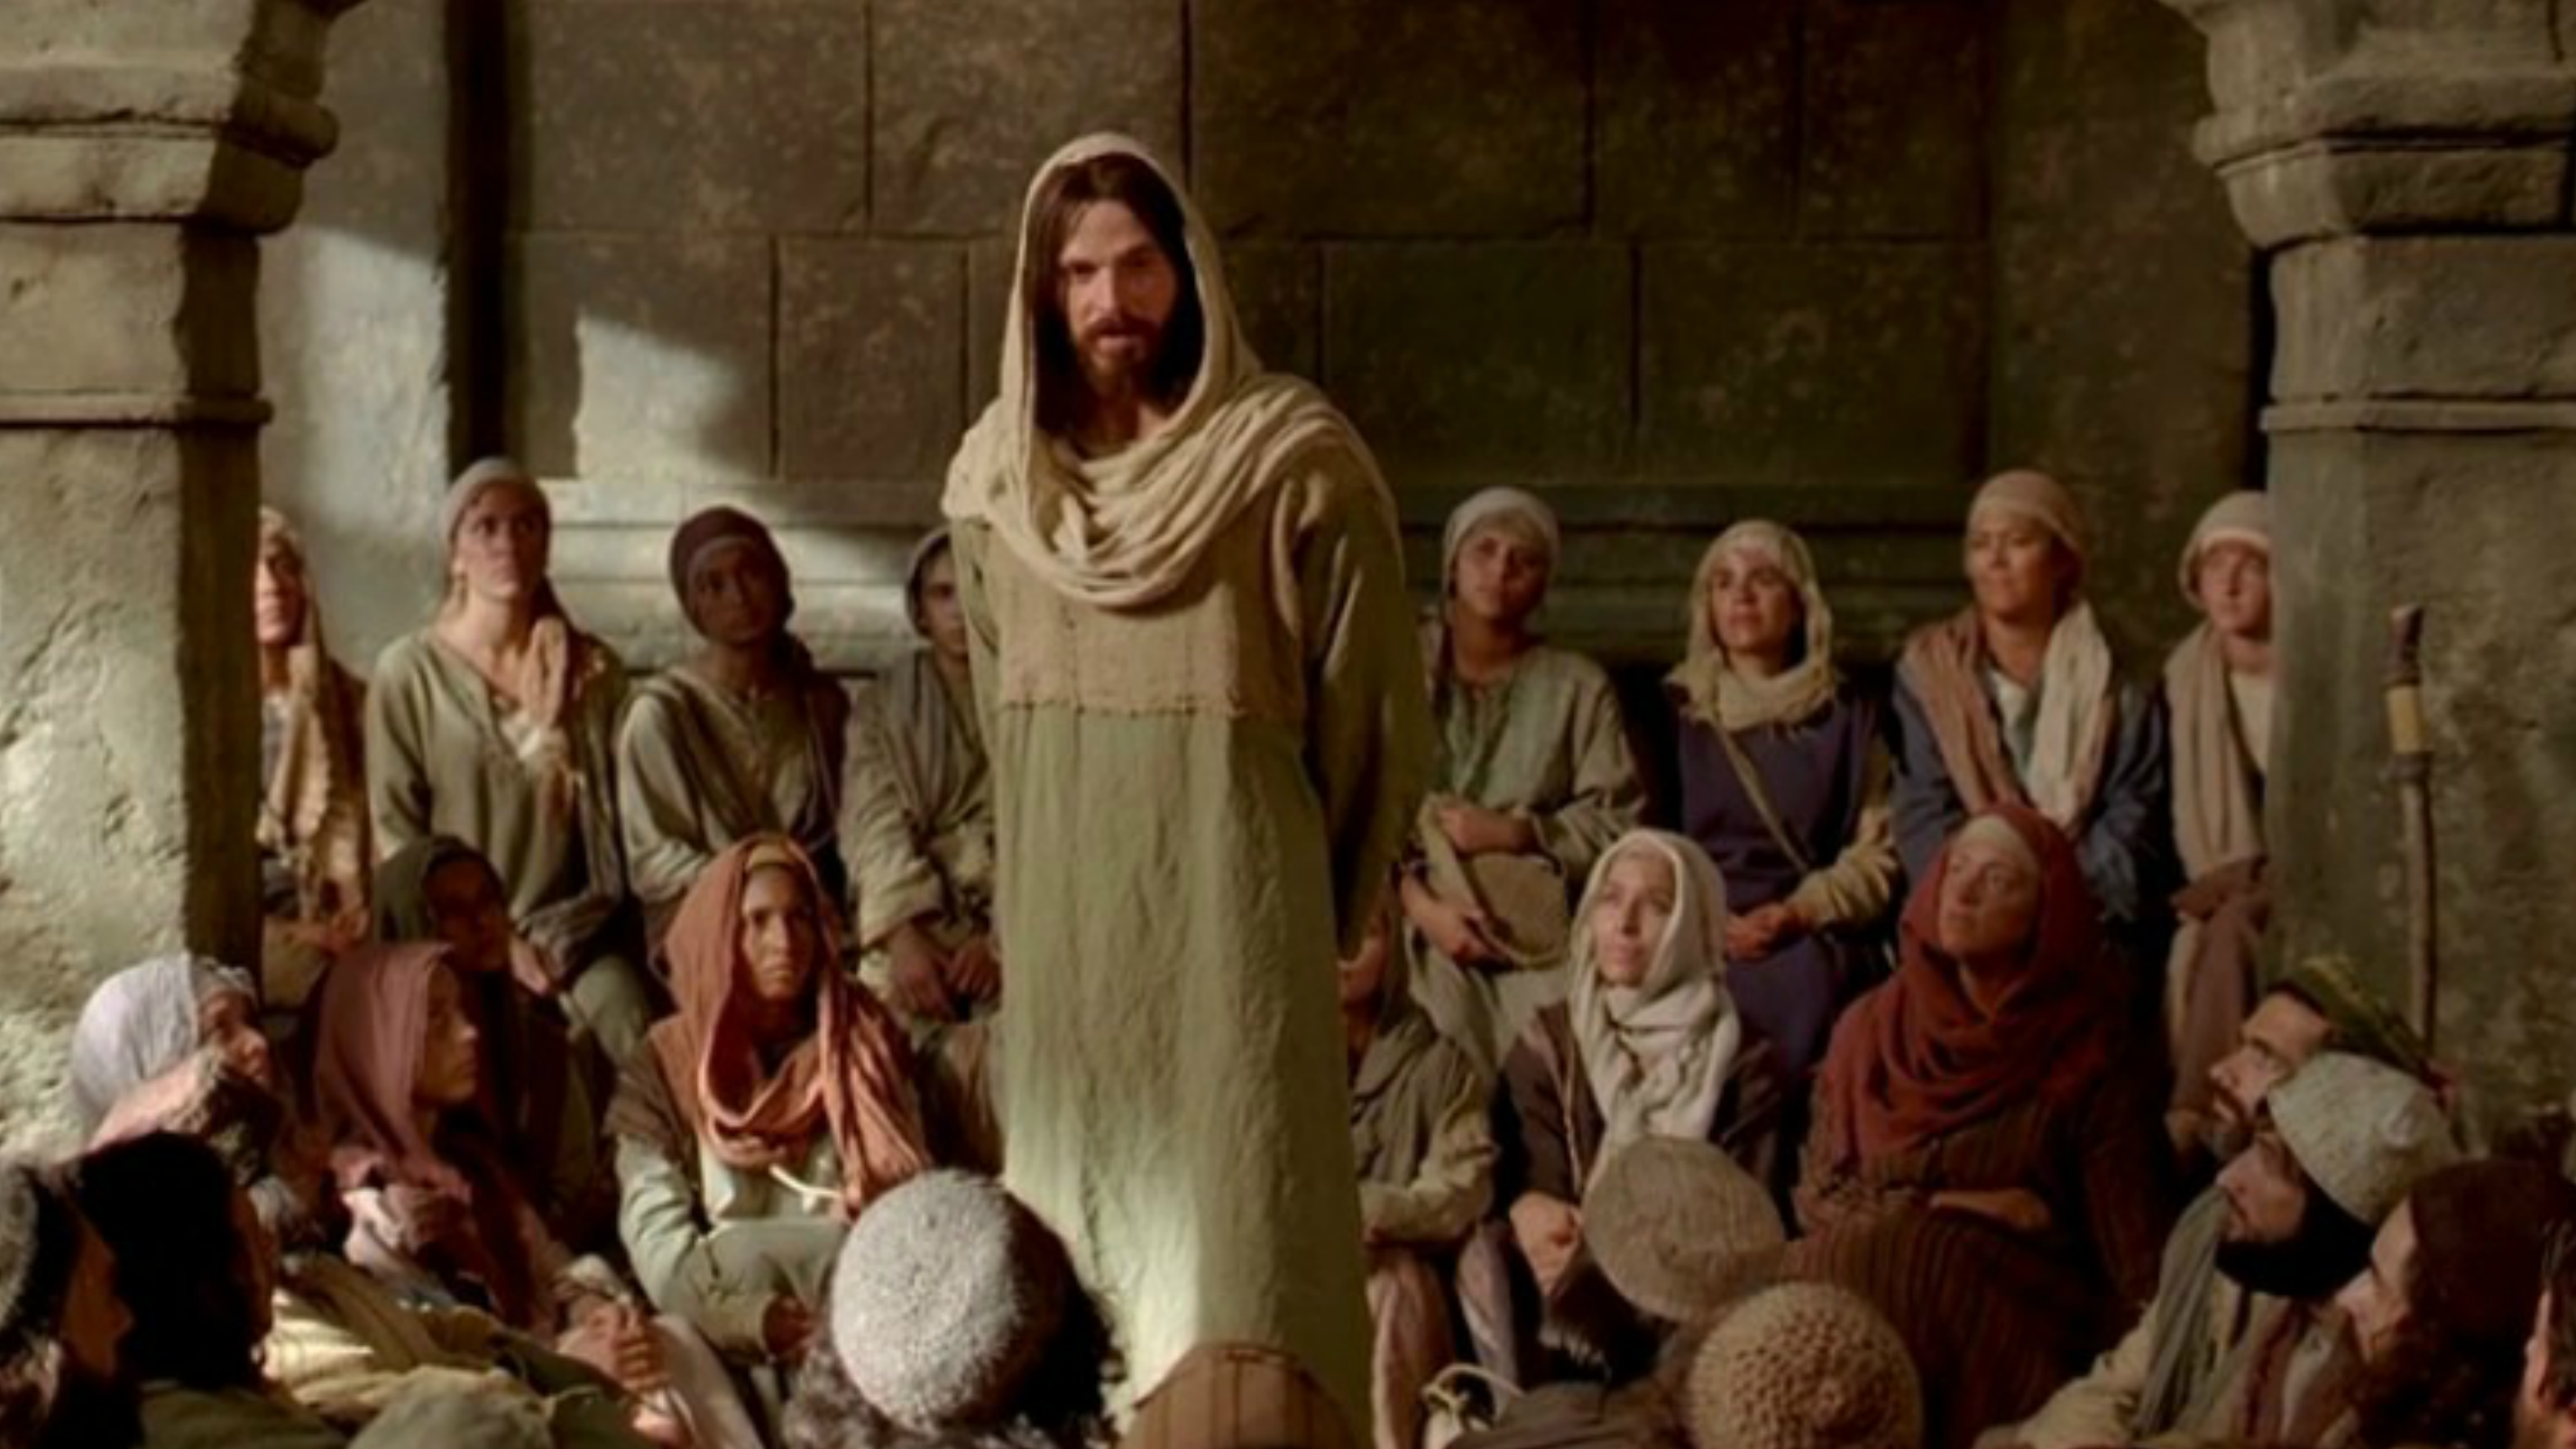 Jesus Christ teaching a group of people seated around Him.